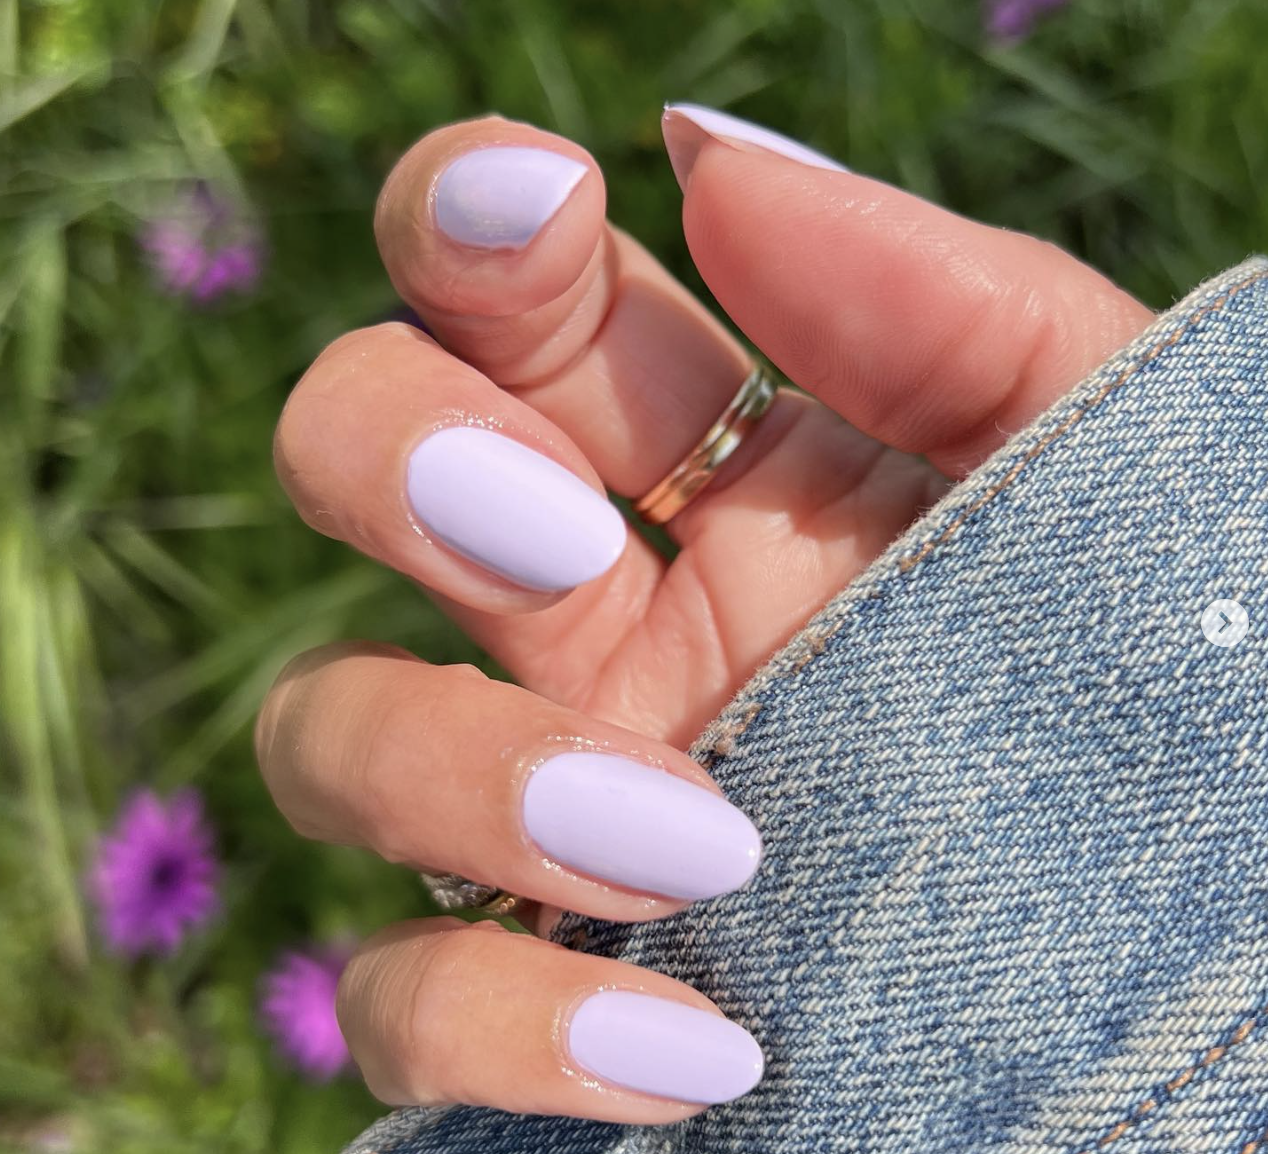 An close up of a hand with lavender colored painted nails.